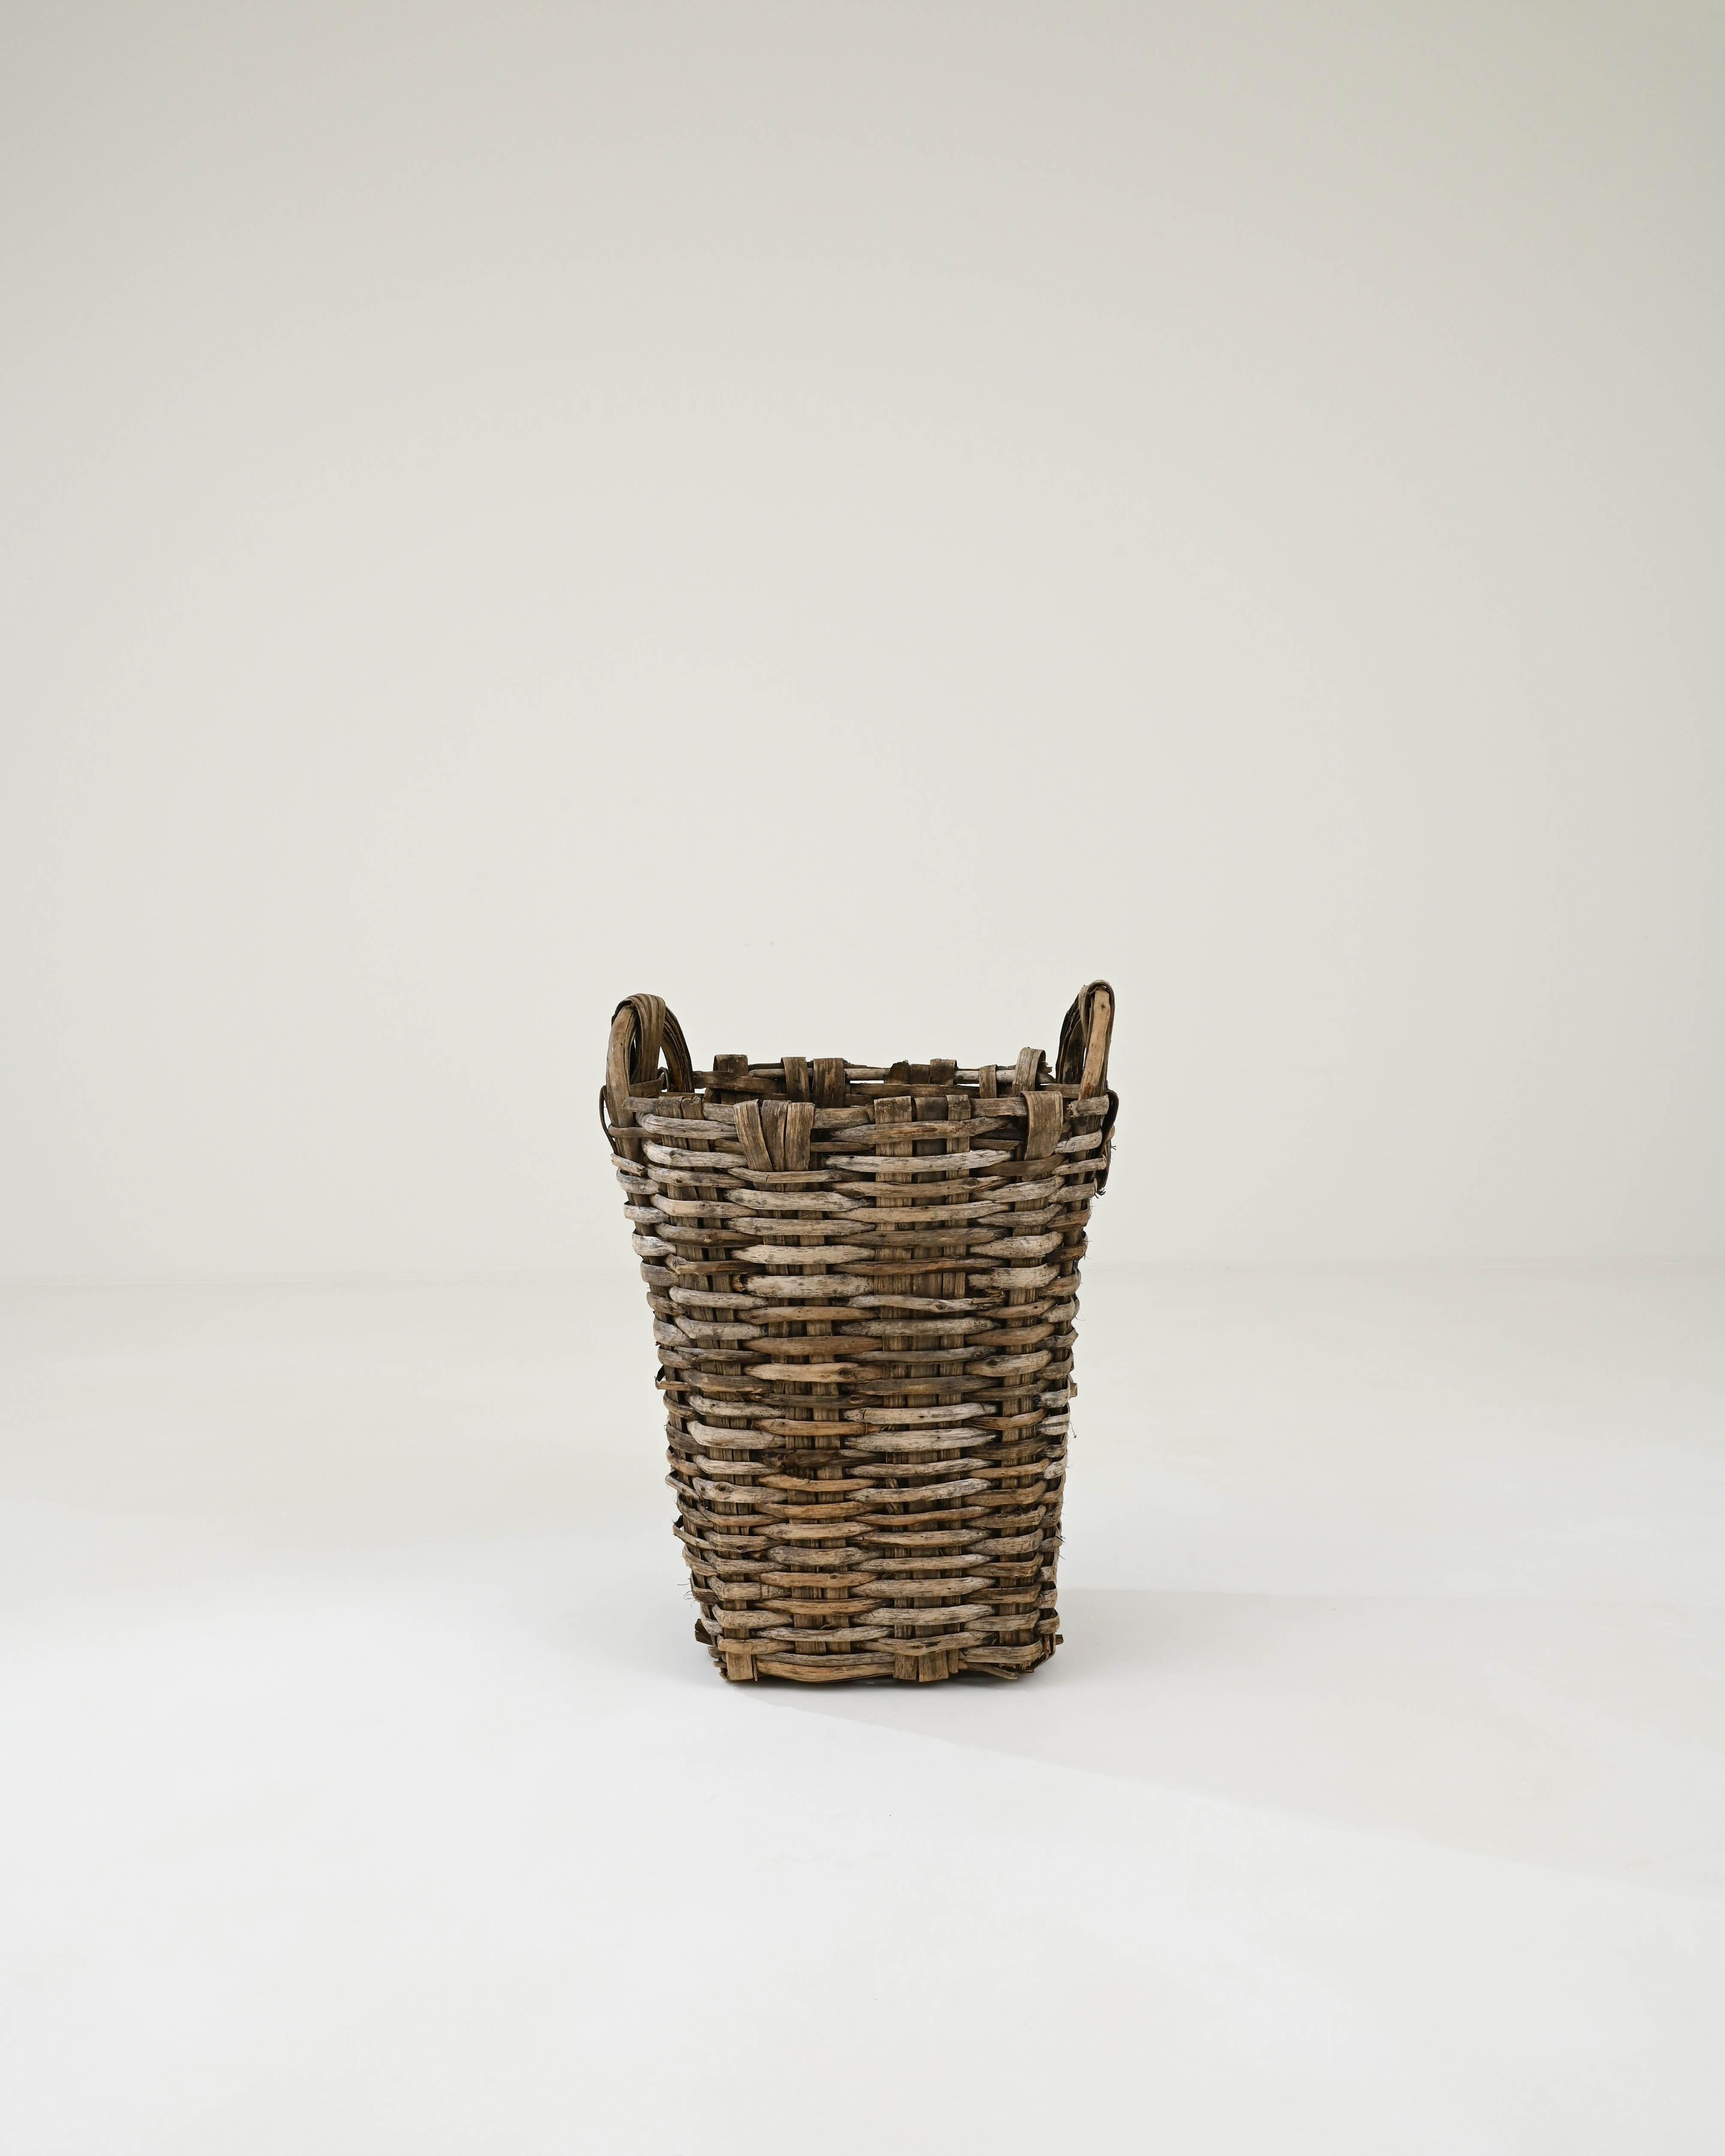 Hand-woven in the 1950s, this artisanal basket exemplifies the rich tradition of wicker basketry in Portugal that dates back centuries. The masterful weaving technique features captivating patterns accentuated by the interplay of natural wicker hues